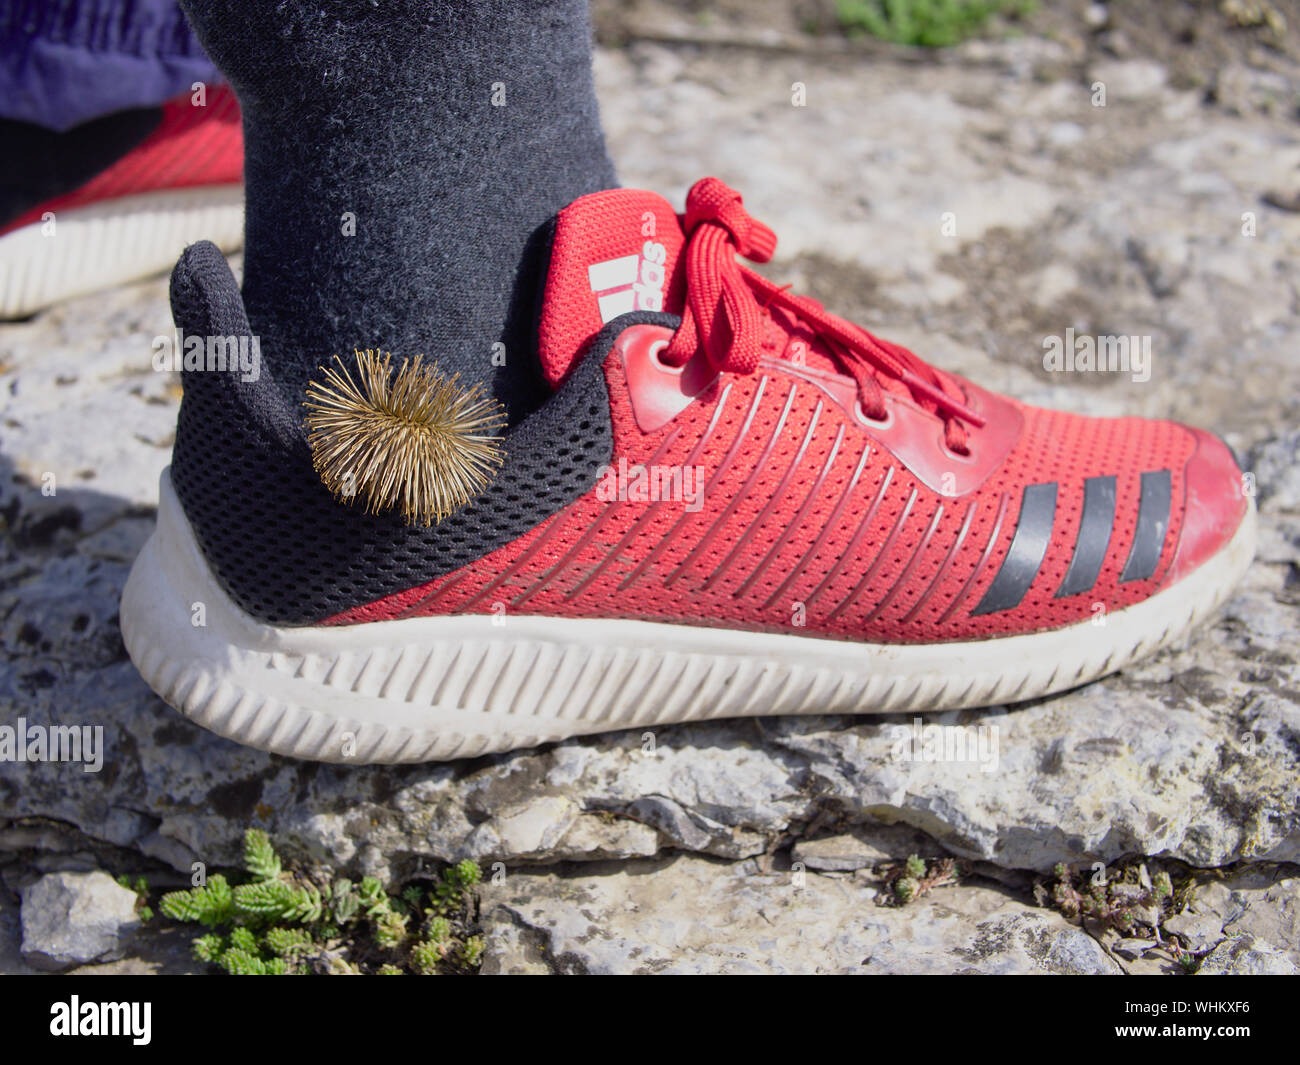 Sticky burr (Burdock) on a young boys pair of shiny new red Adidas running  shoes Stock Photo - Alamy